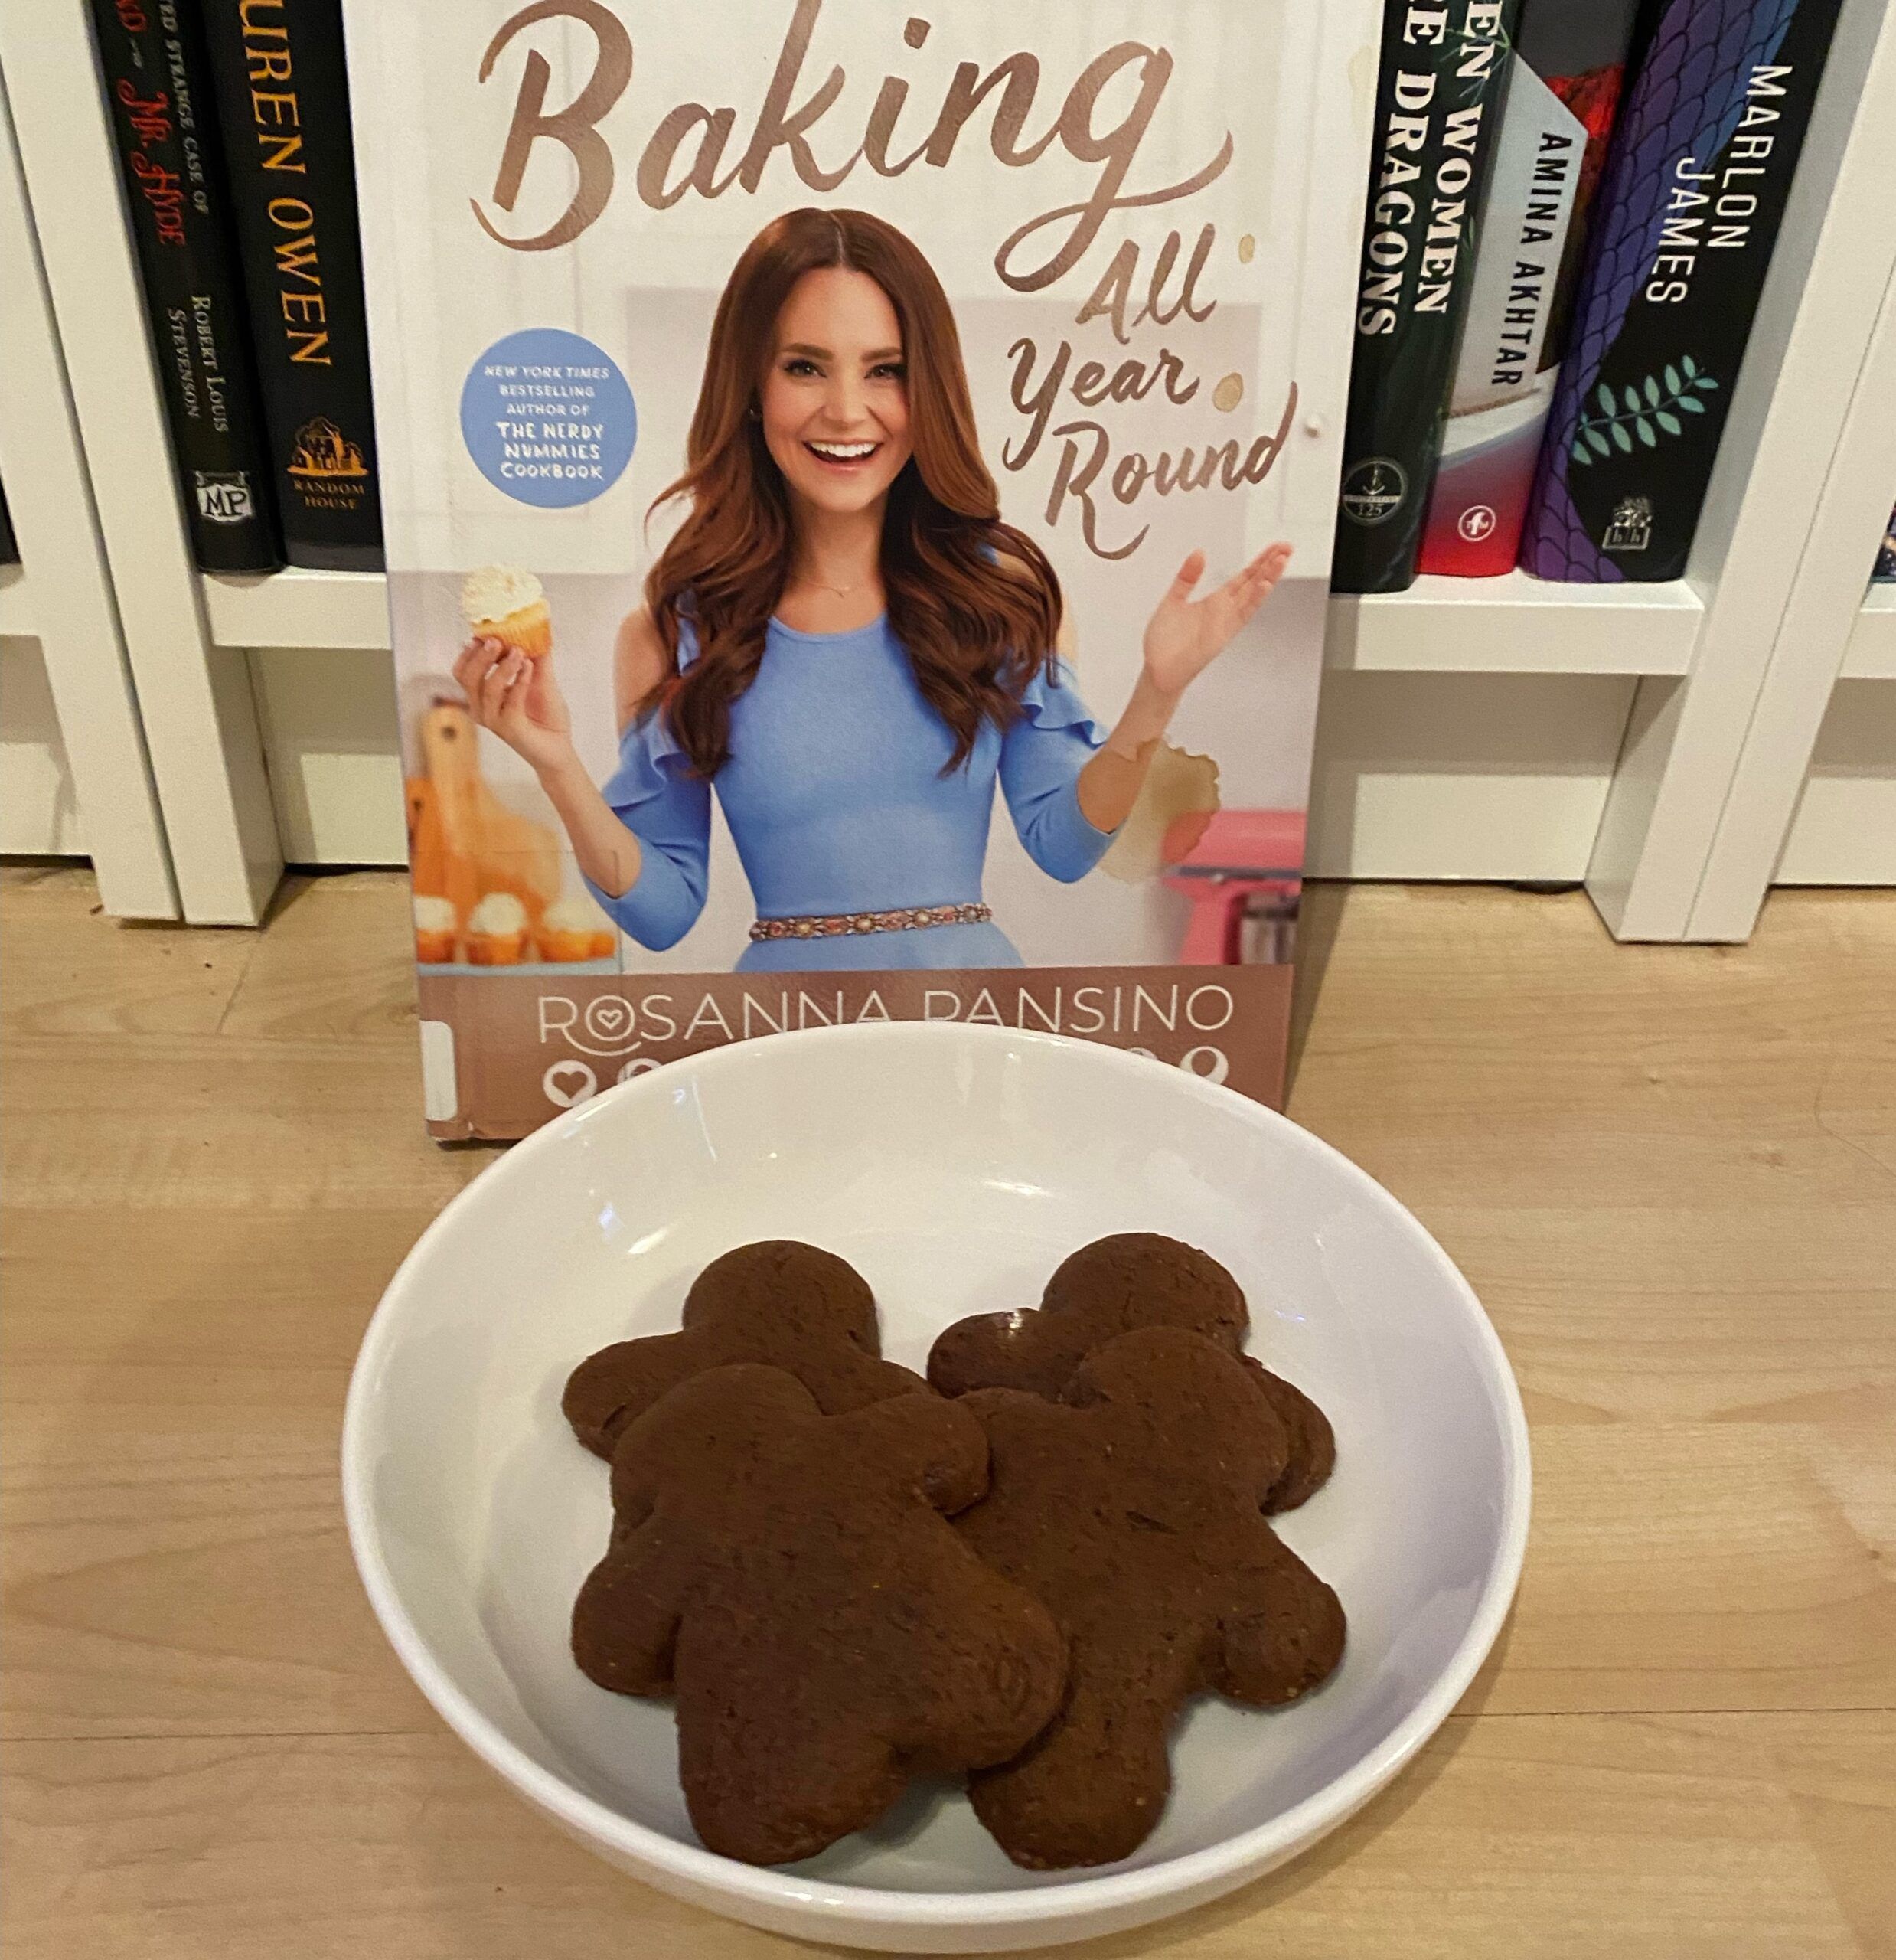 A plate of gingerbread cookies in front of the Baking All Year Round cookbook